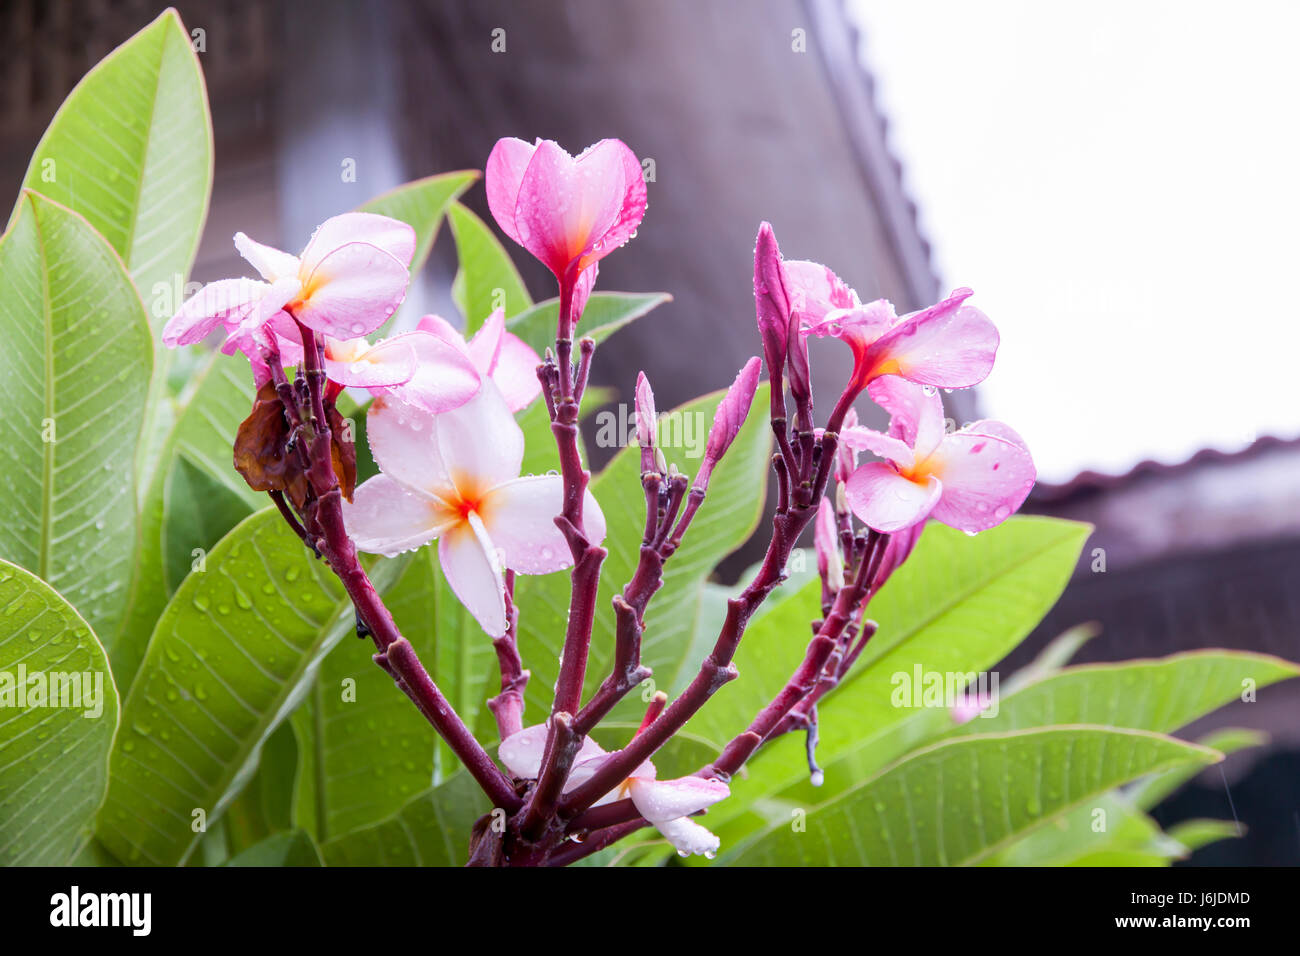 Plumeria or the plumeria tree frangipani tropical flowers when it rains. white and pink color. Stock Photo